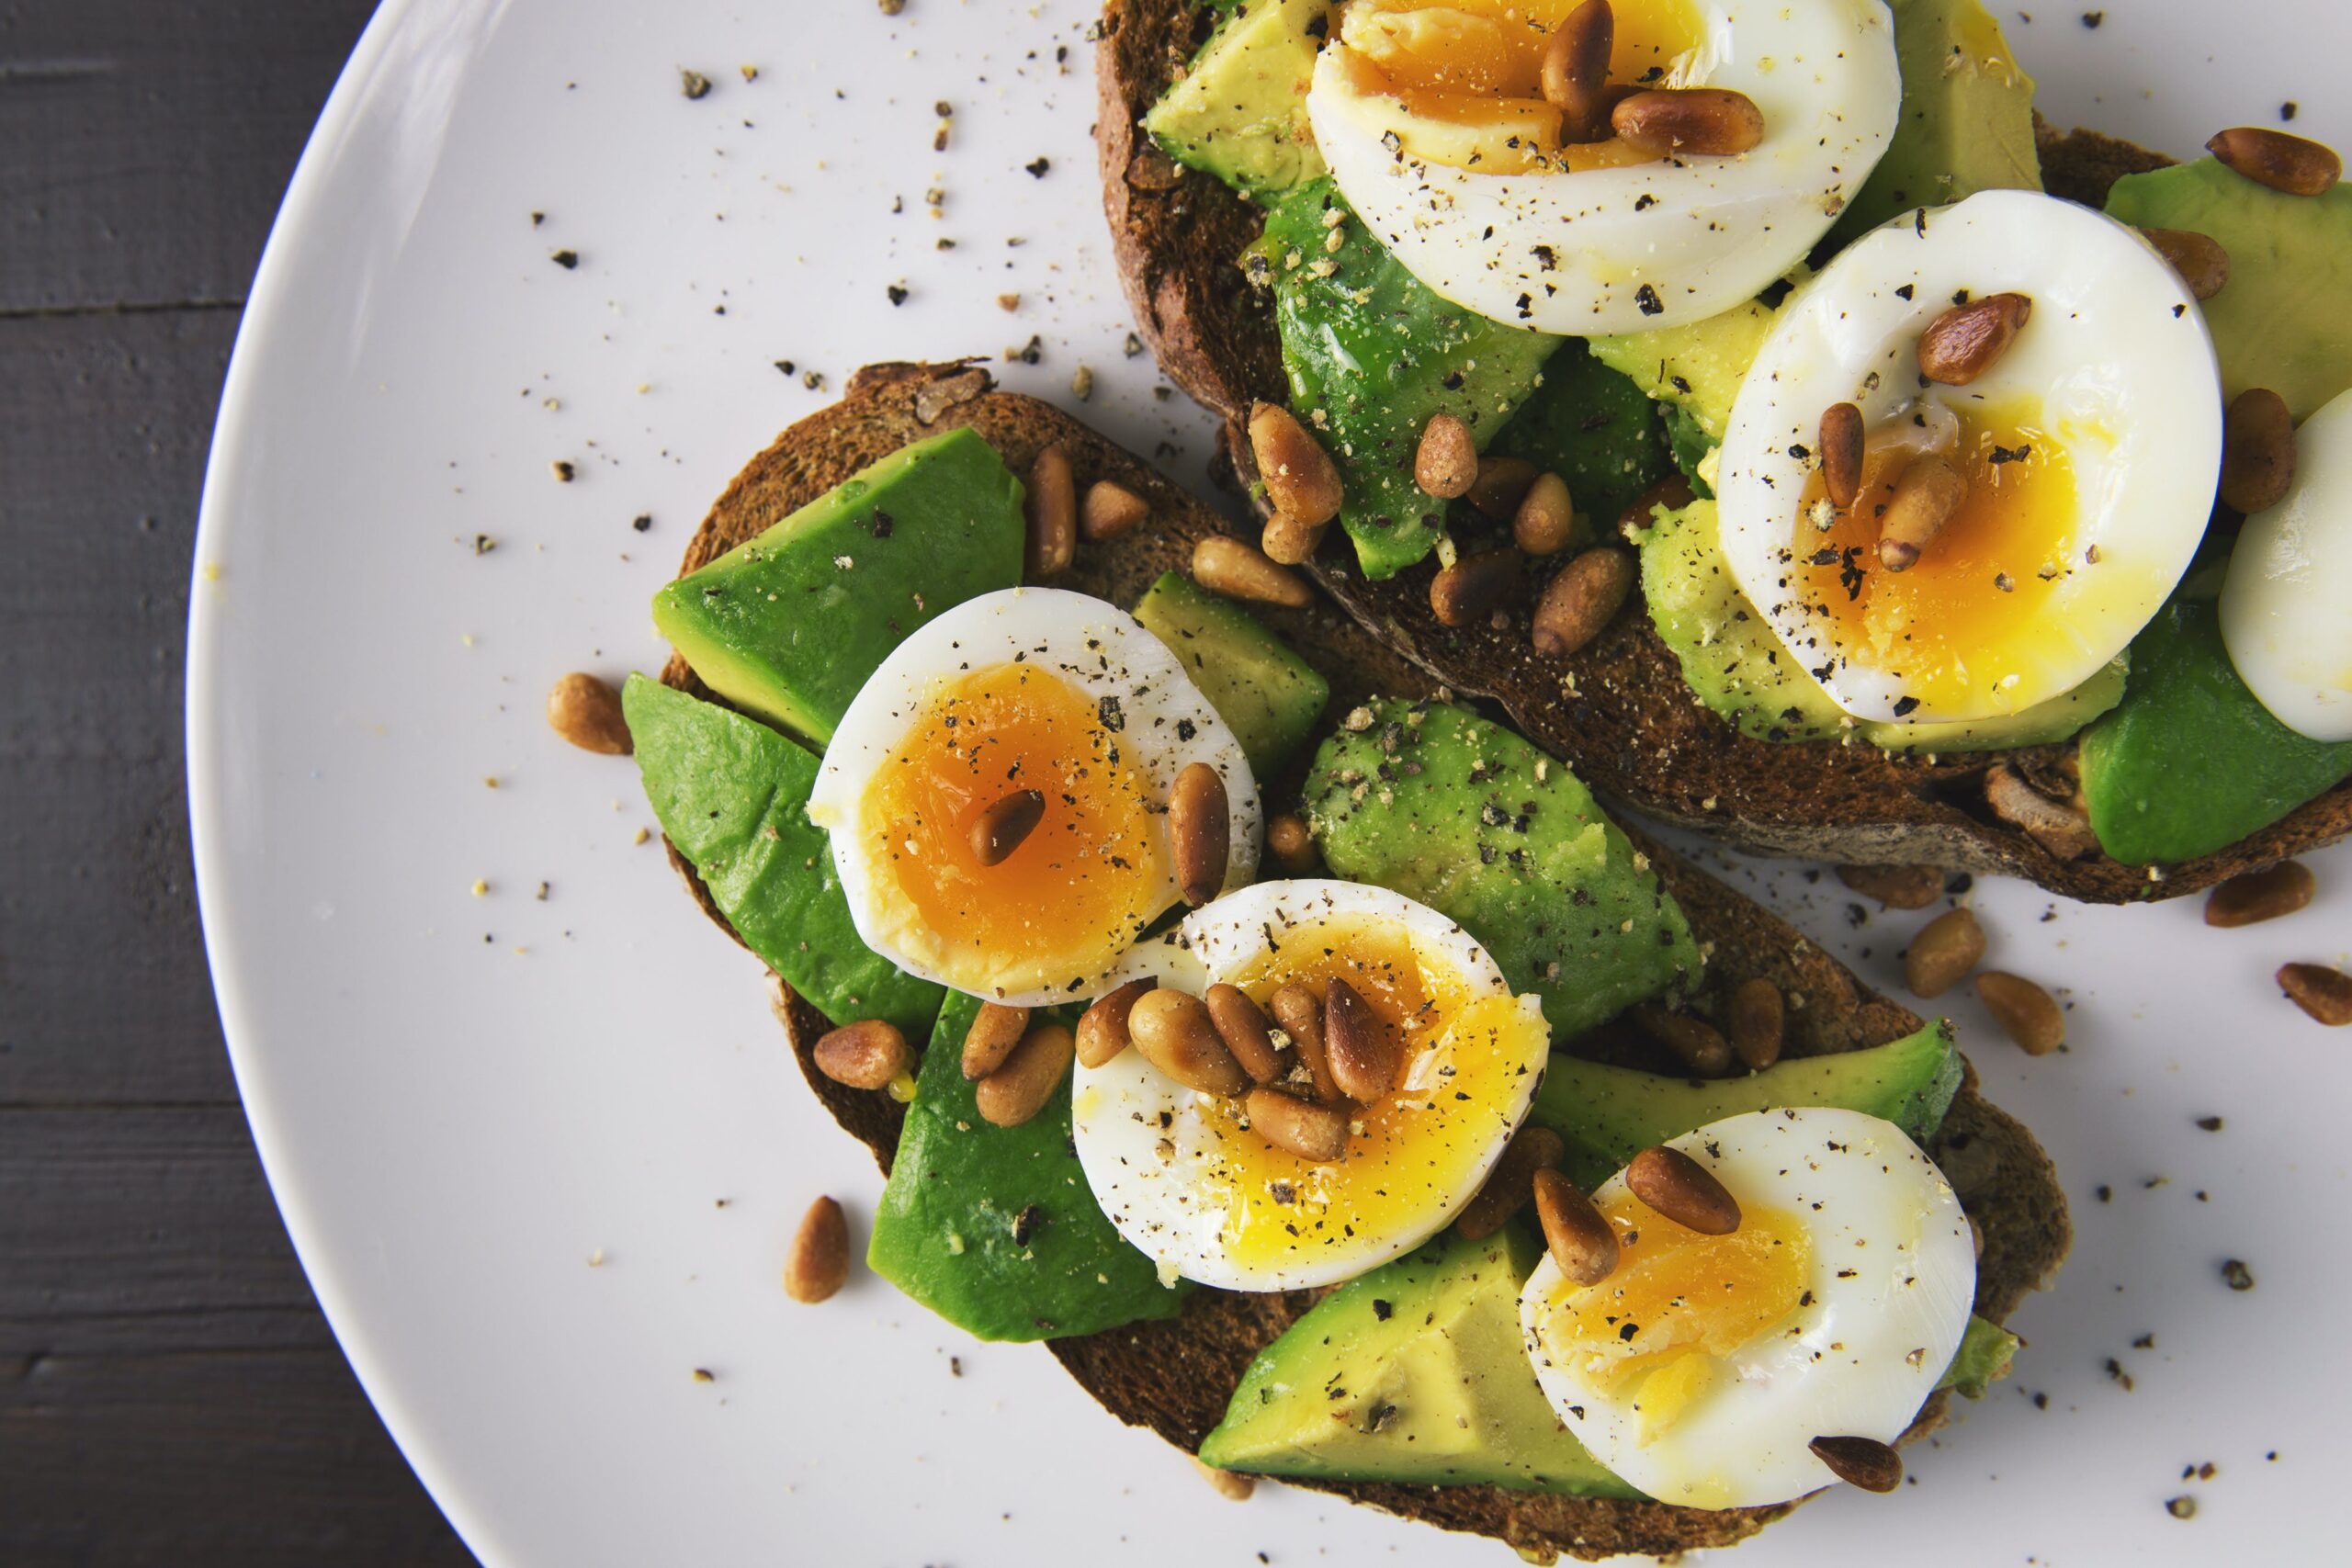 Start your day off right with a breakfast full of skin-boosting ingredients like egg and avocado. Pexels/Foodie Factor